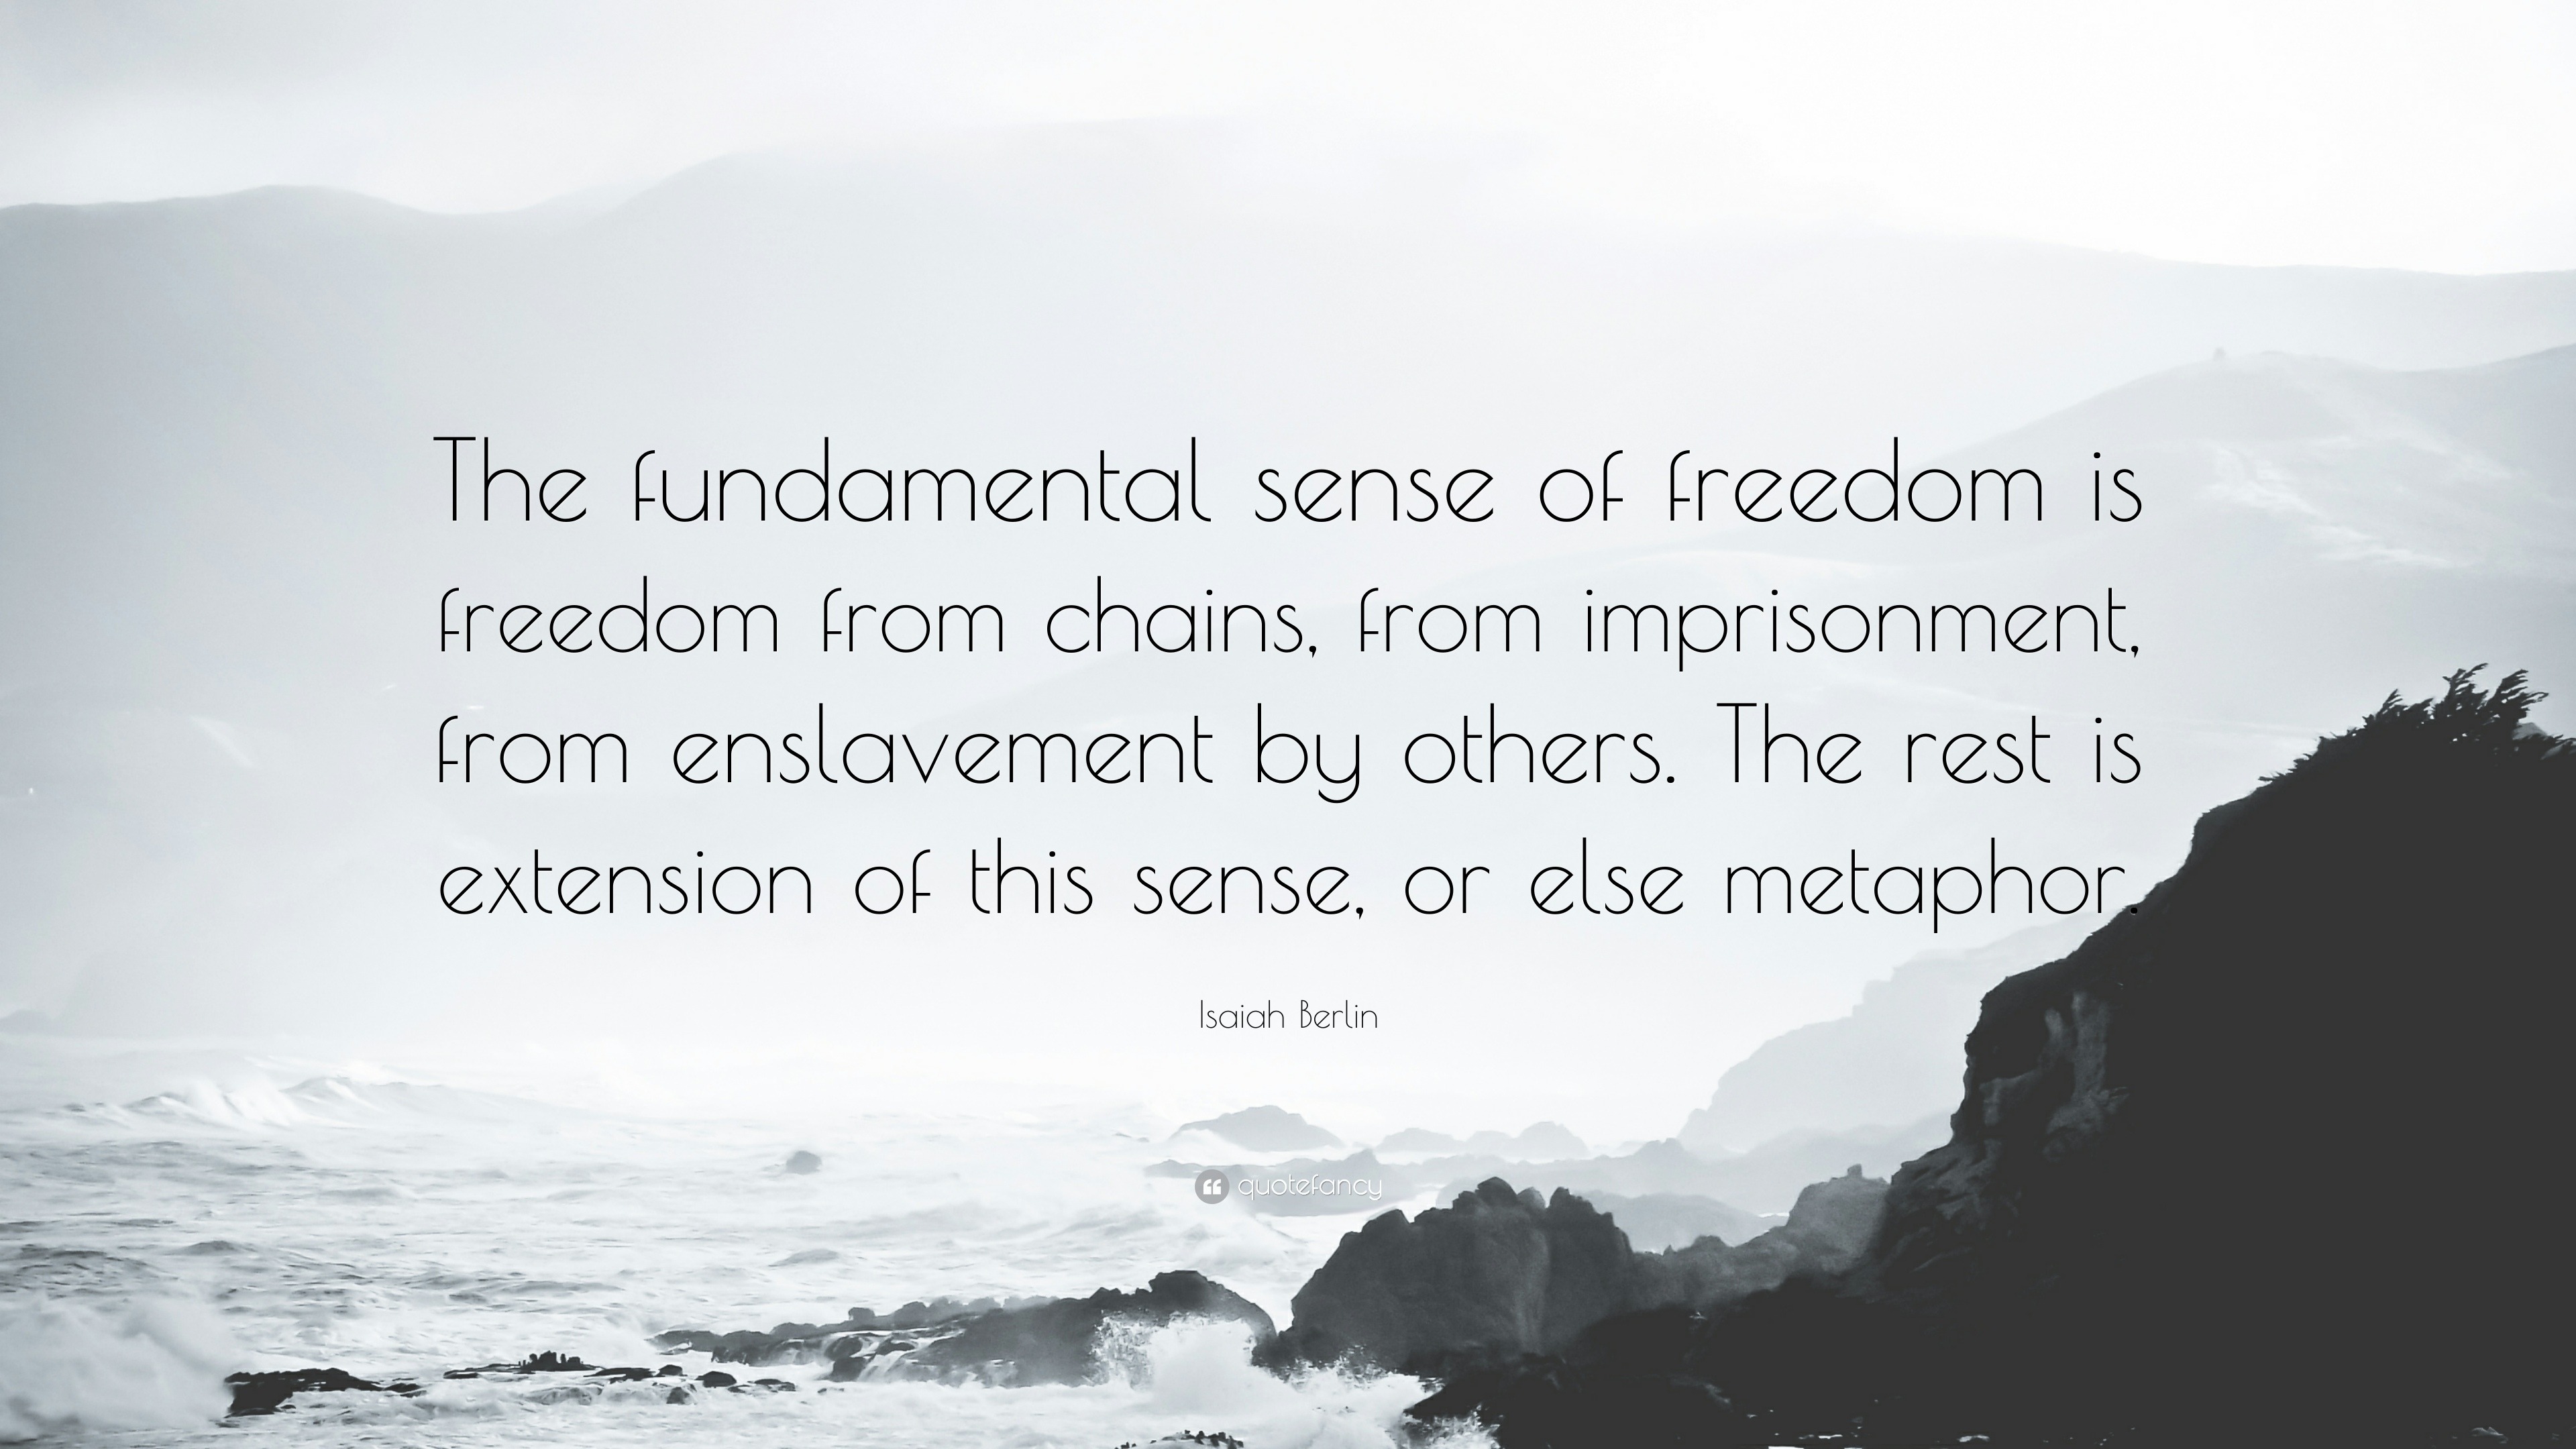 Isaiah Berlin Quote: “The fundamental sense of freedom is freedom from